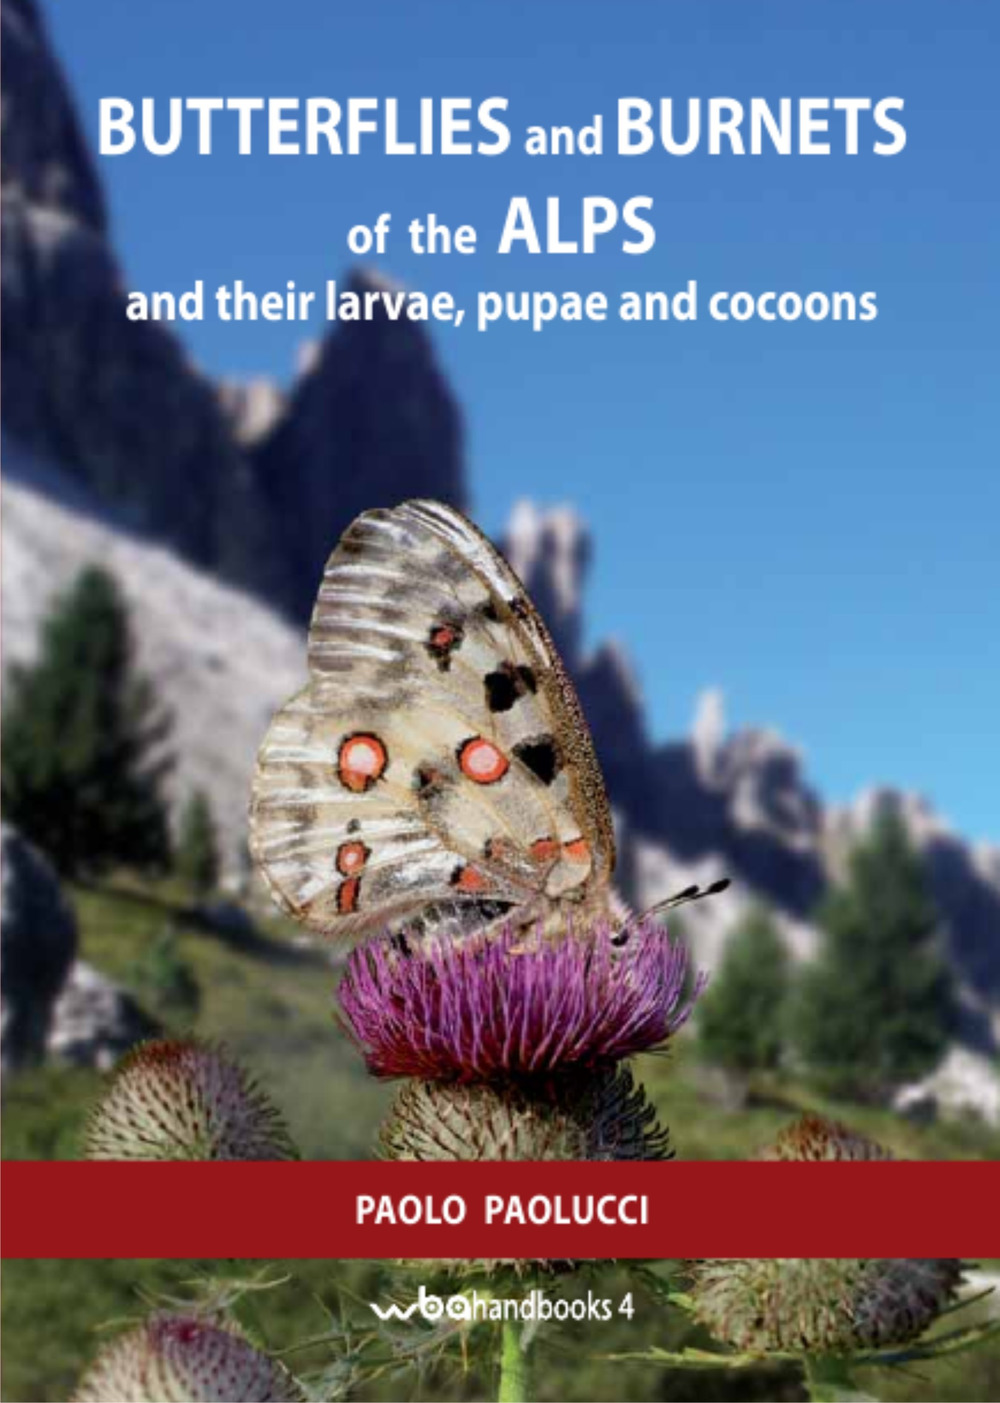 Butterflies and burnets of the Alps and their larvae, pupae and cocoons